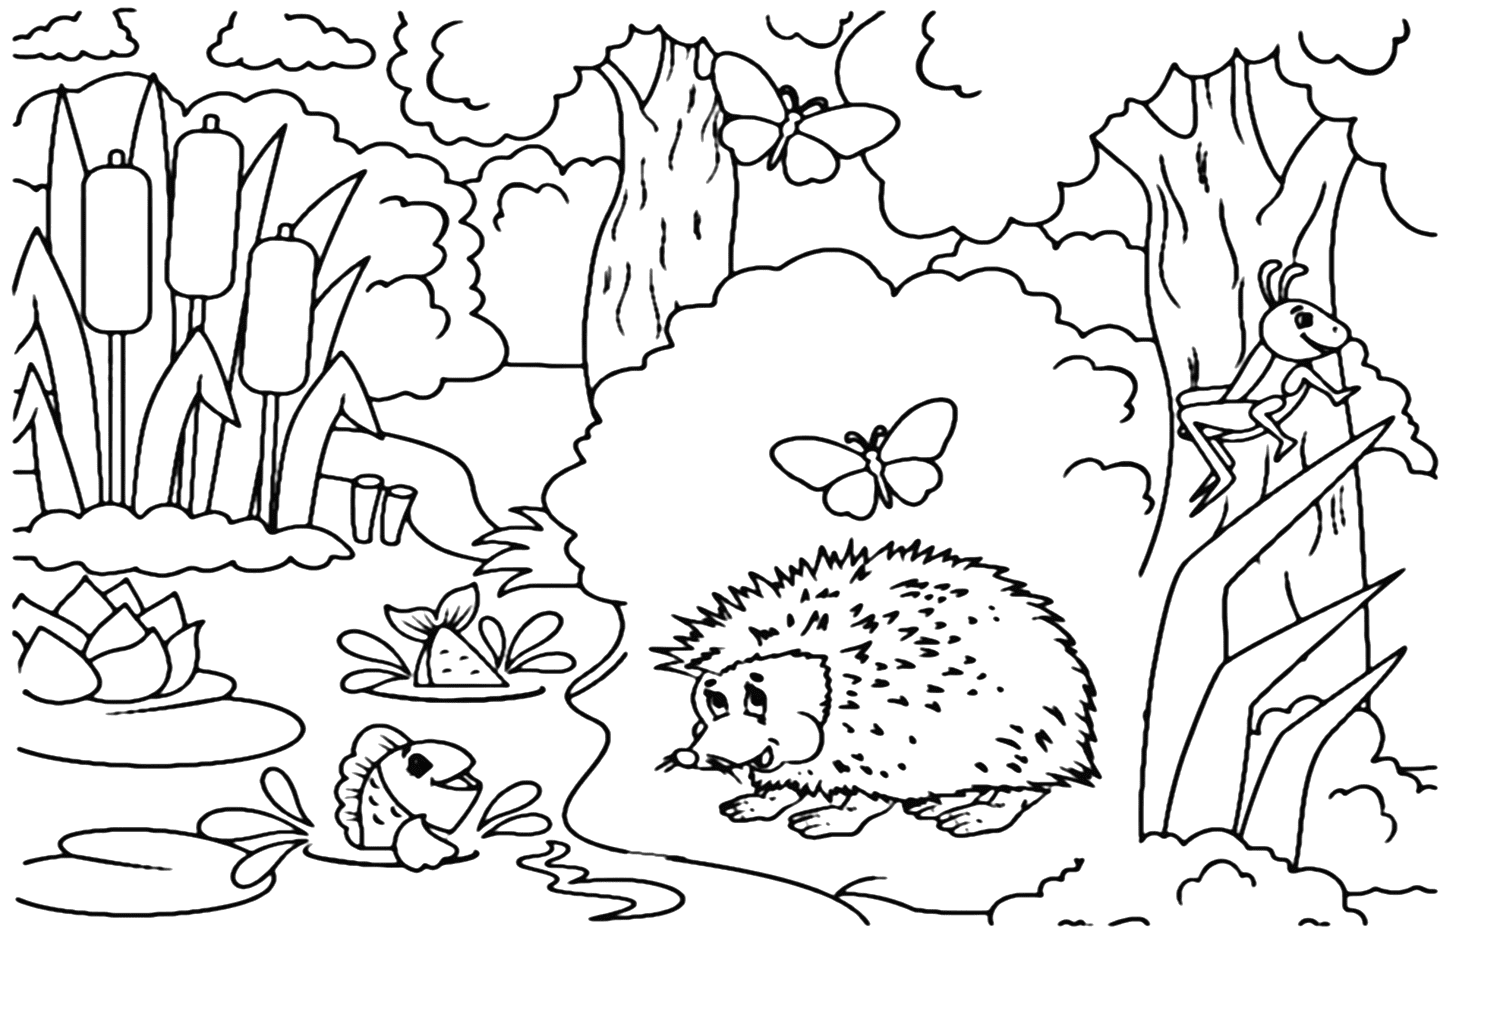 Porcupine coloring Page For Preschooler from Porcupine